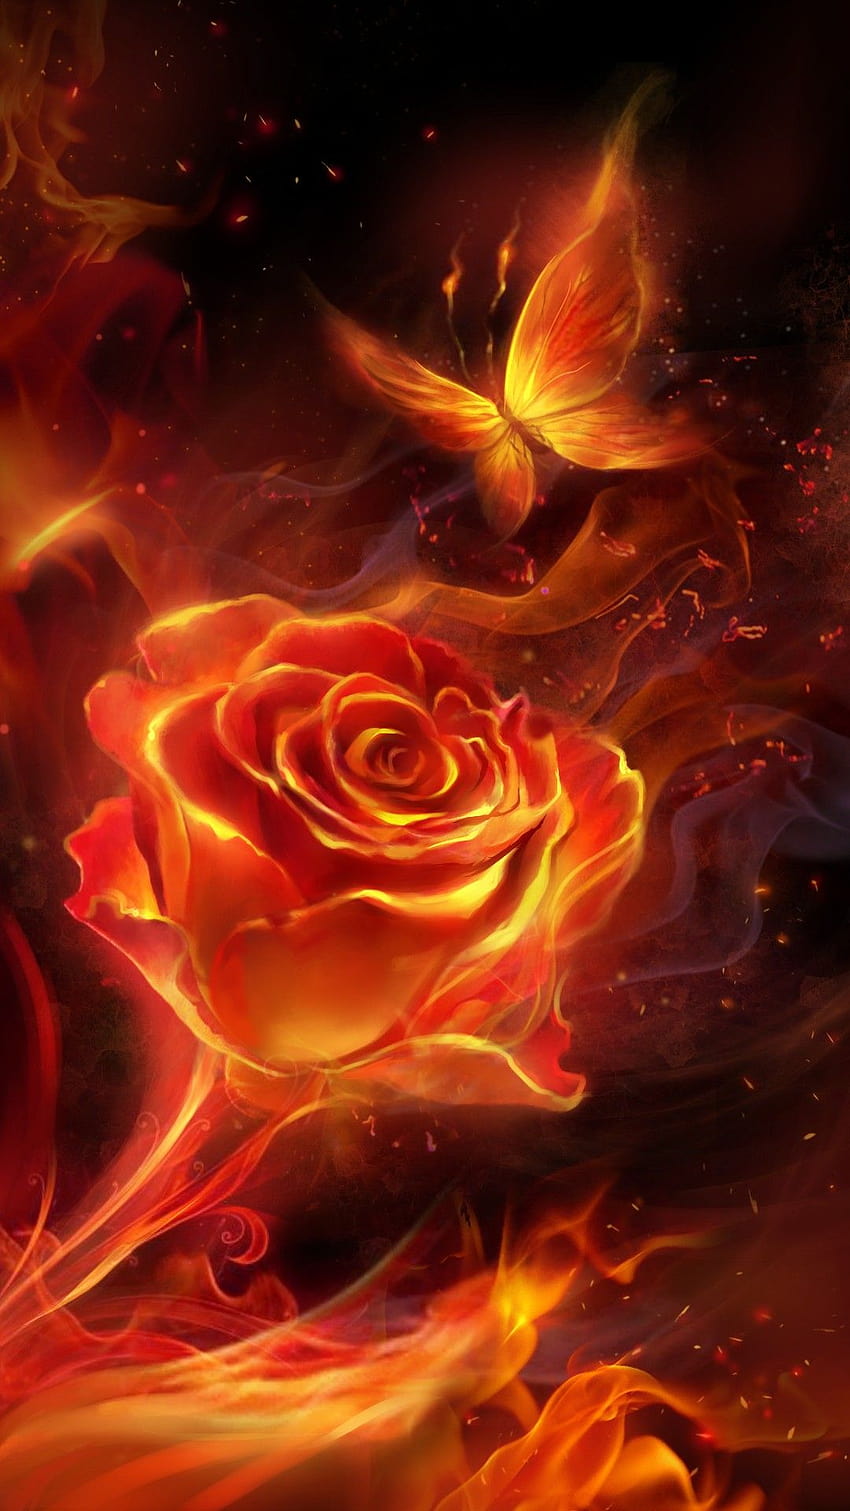 Roses and butterflies of fire, rose on fire HD phone wallpaper